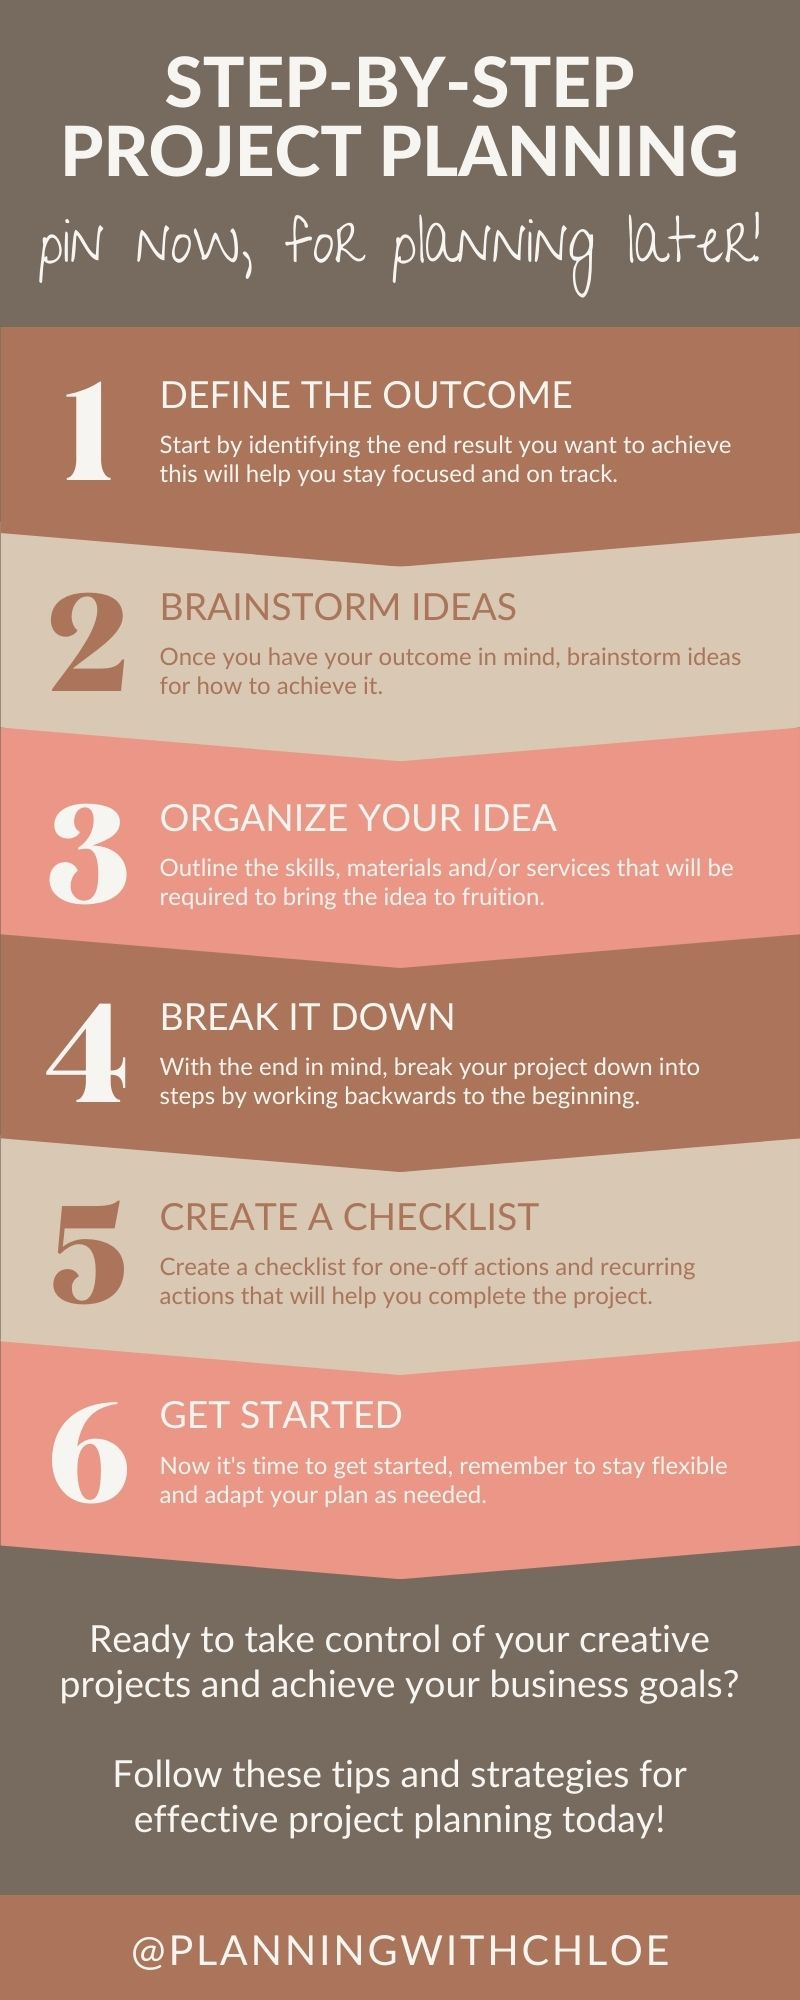 A step-by-step routine for breaking down a creative project